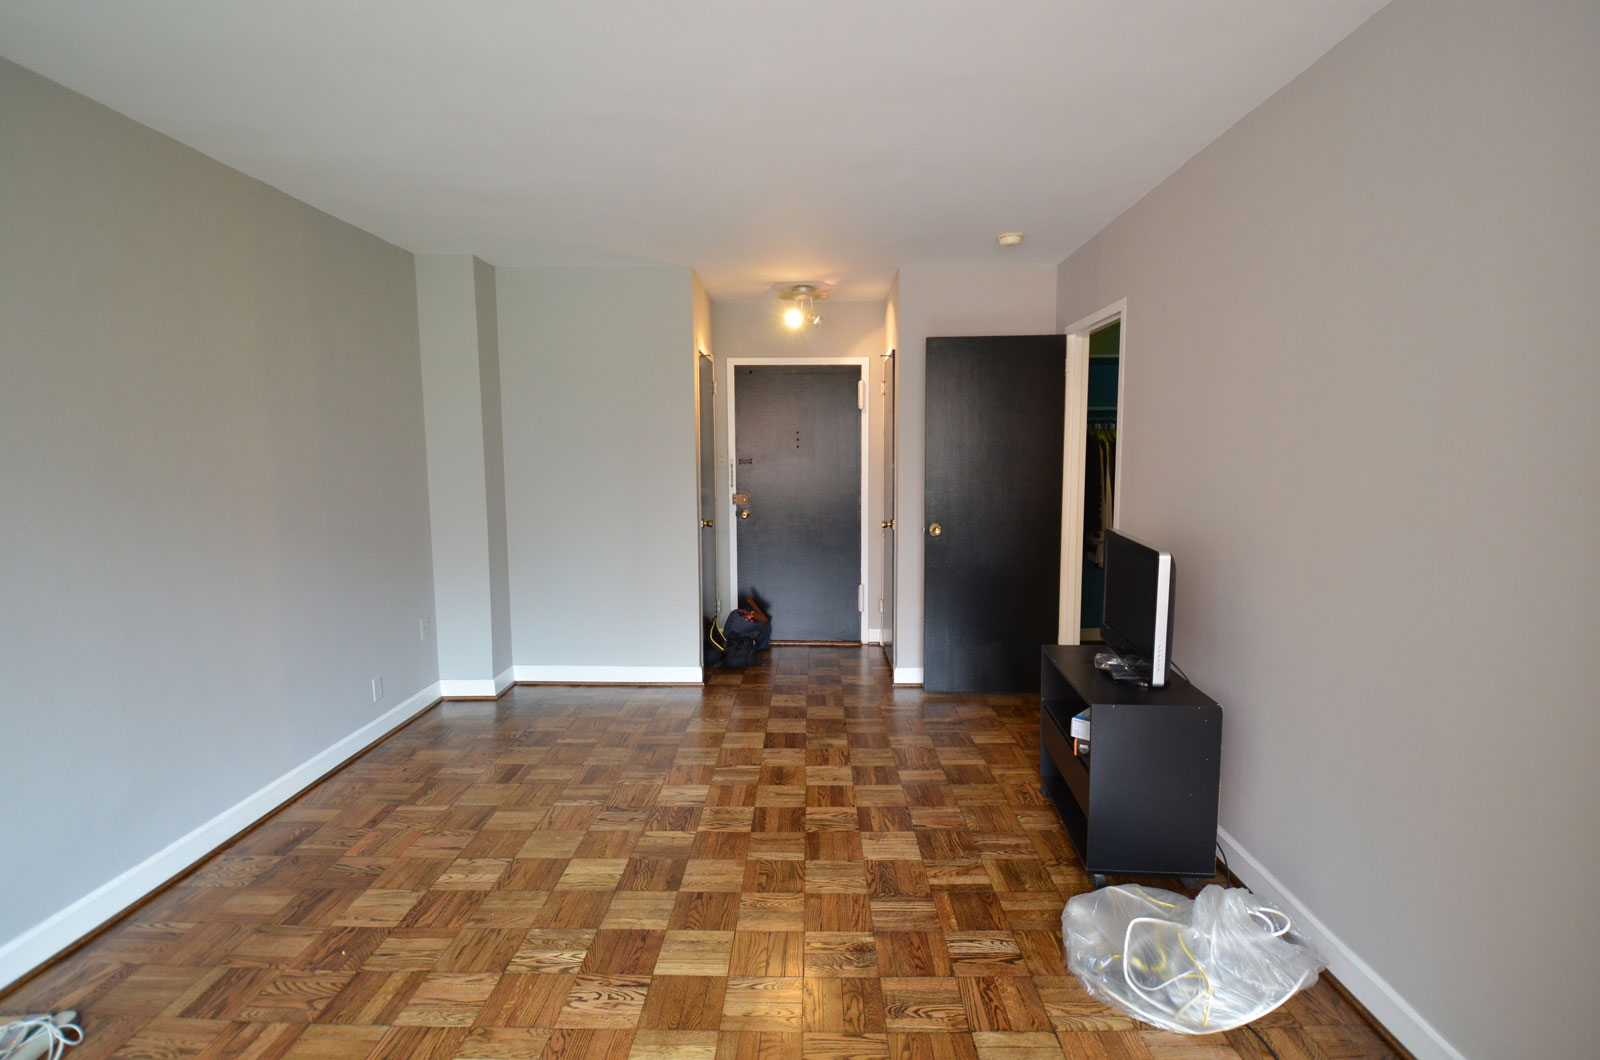 Entrance Applying Tile Cool Entrance Applying Wooden Flooring Tile Combined With White Wall Paint Color Furnished With Black Interior Doors And Completed With Flat Screen TV On Cupboard Interior Design Black Interior Doors And Its Elegant Appearance